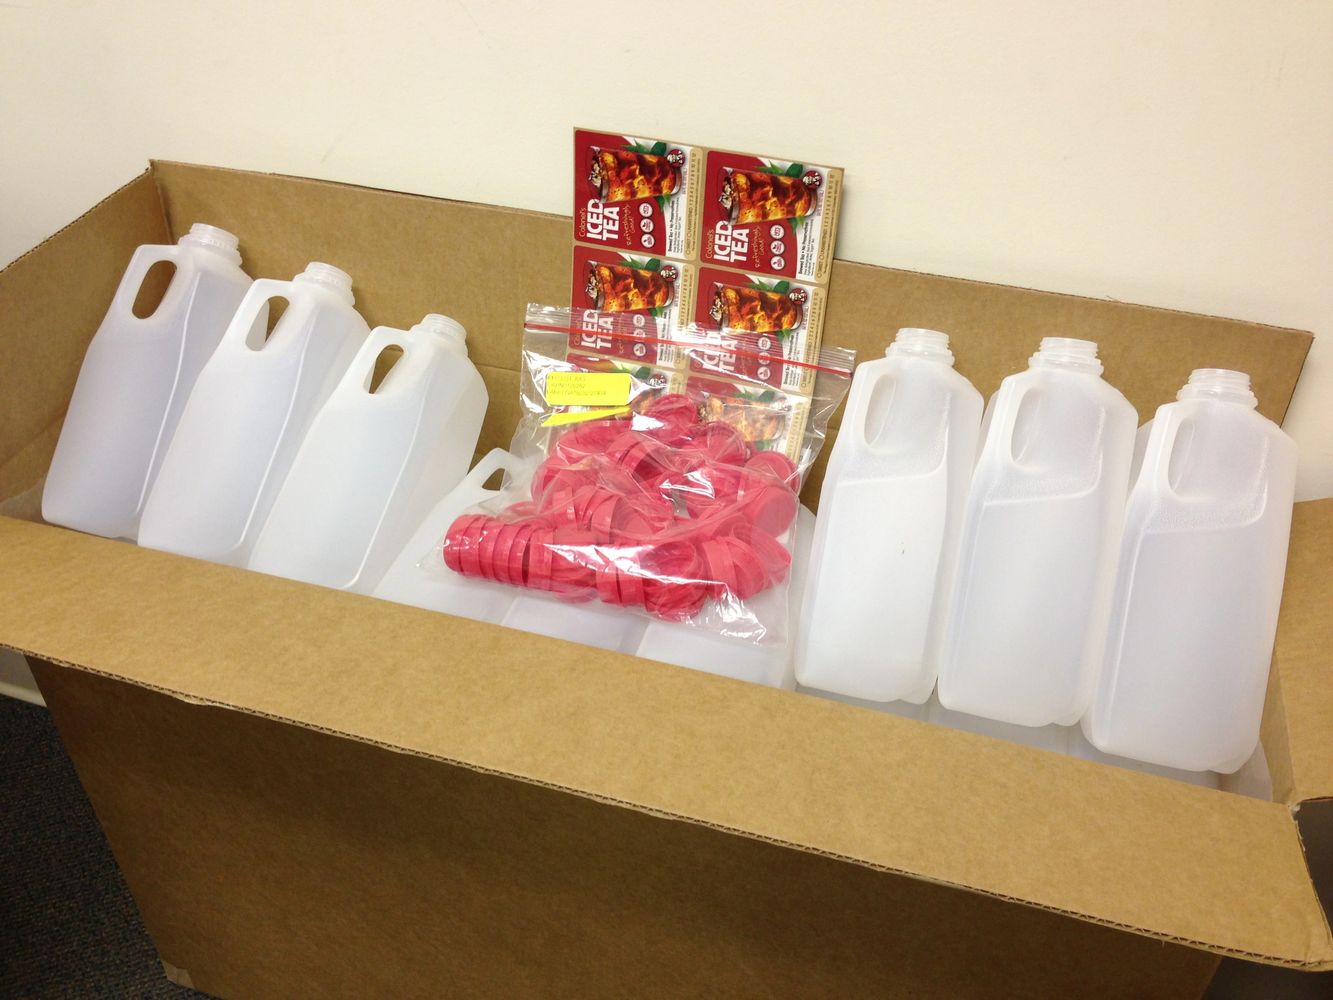 Empty 1 Gallon & 1/2 Half Gallon Tea Jugs, With Lids, Packed In A Corrugated Box